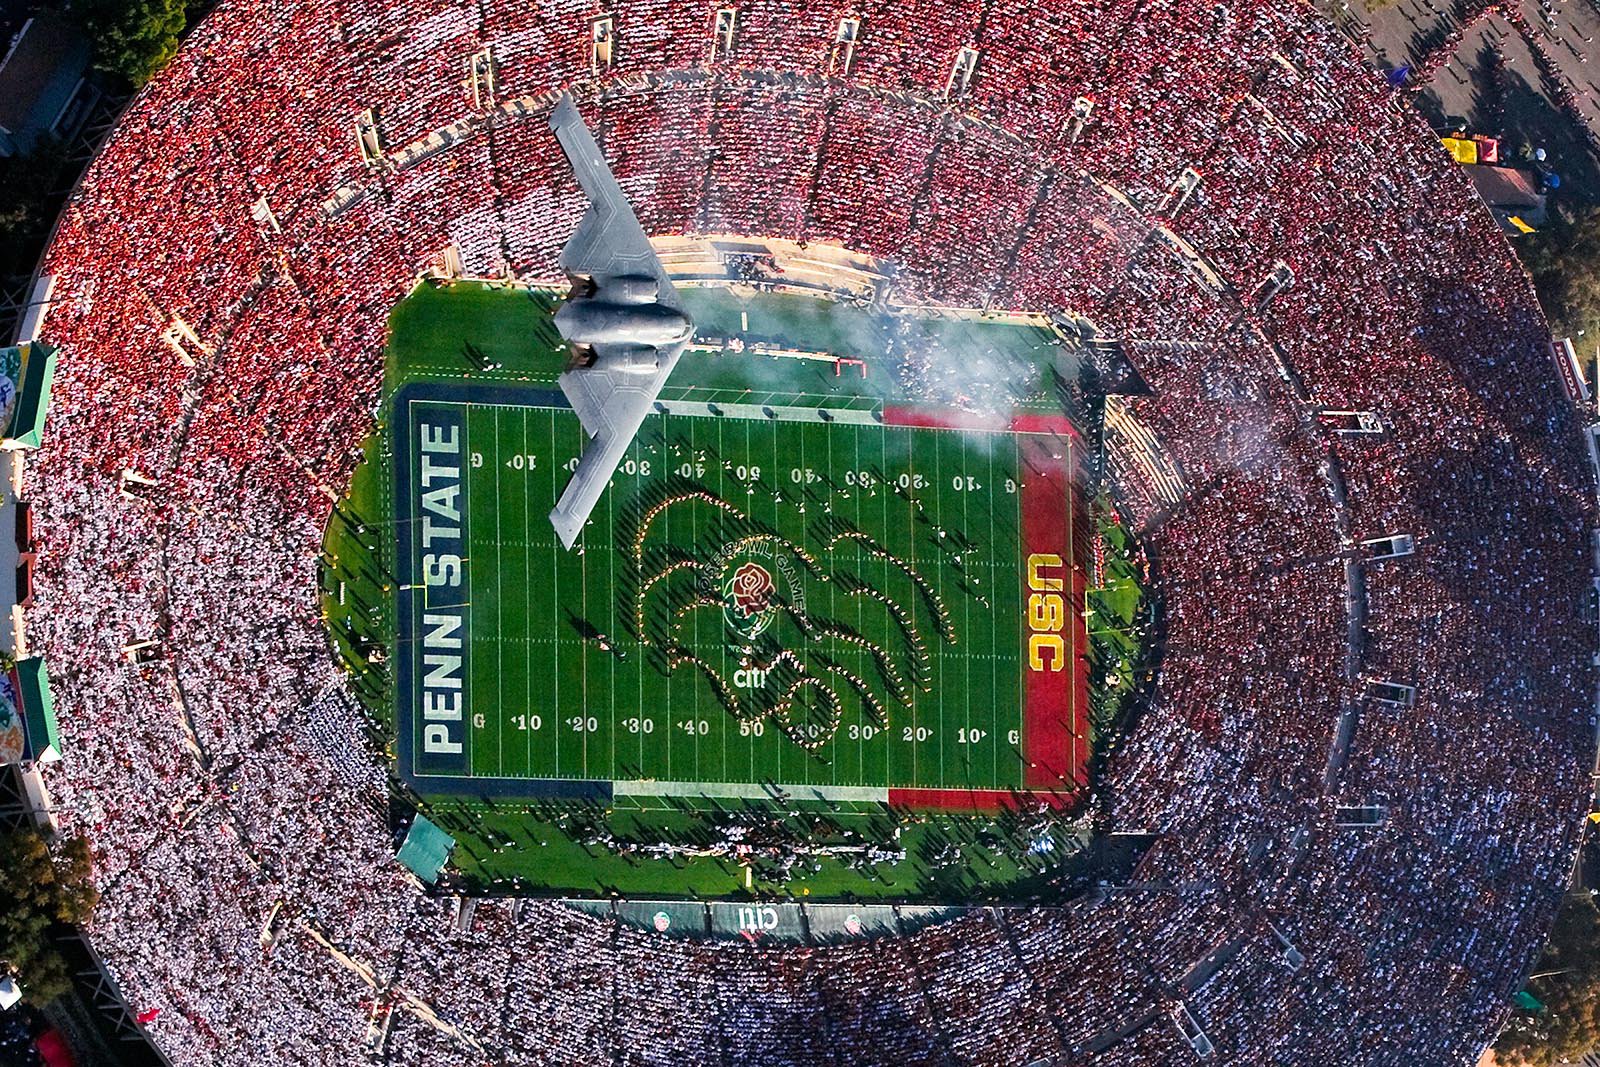 Mark Holtzman's B2 Bomber Rose Bowl Flyover Photo in a Sports